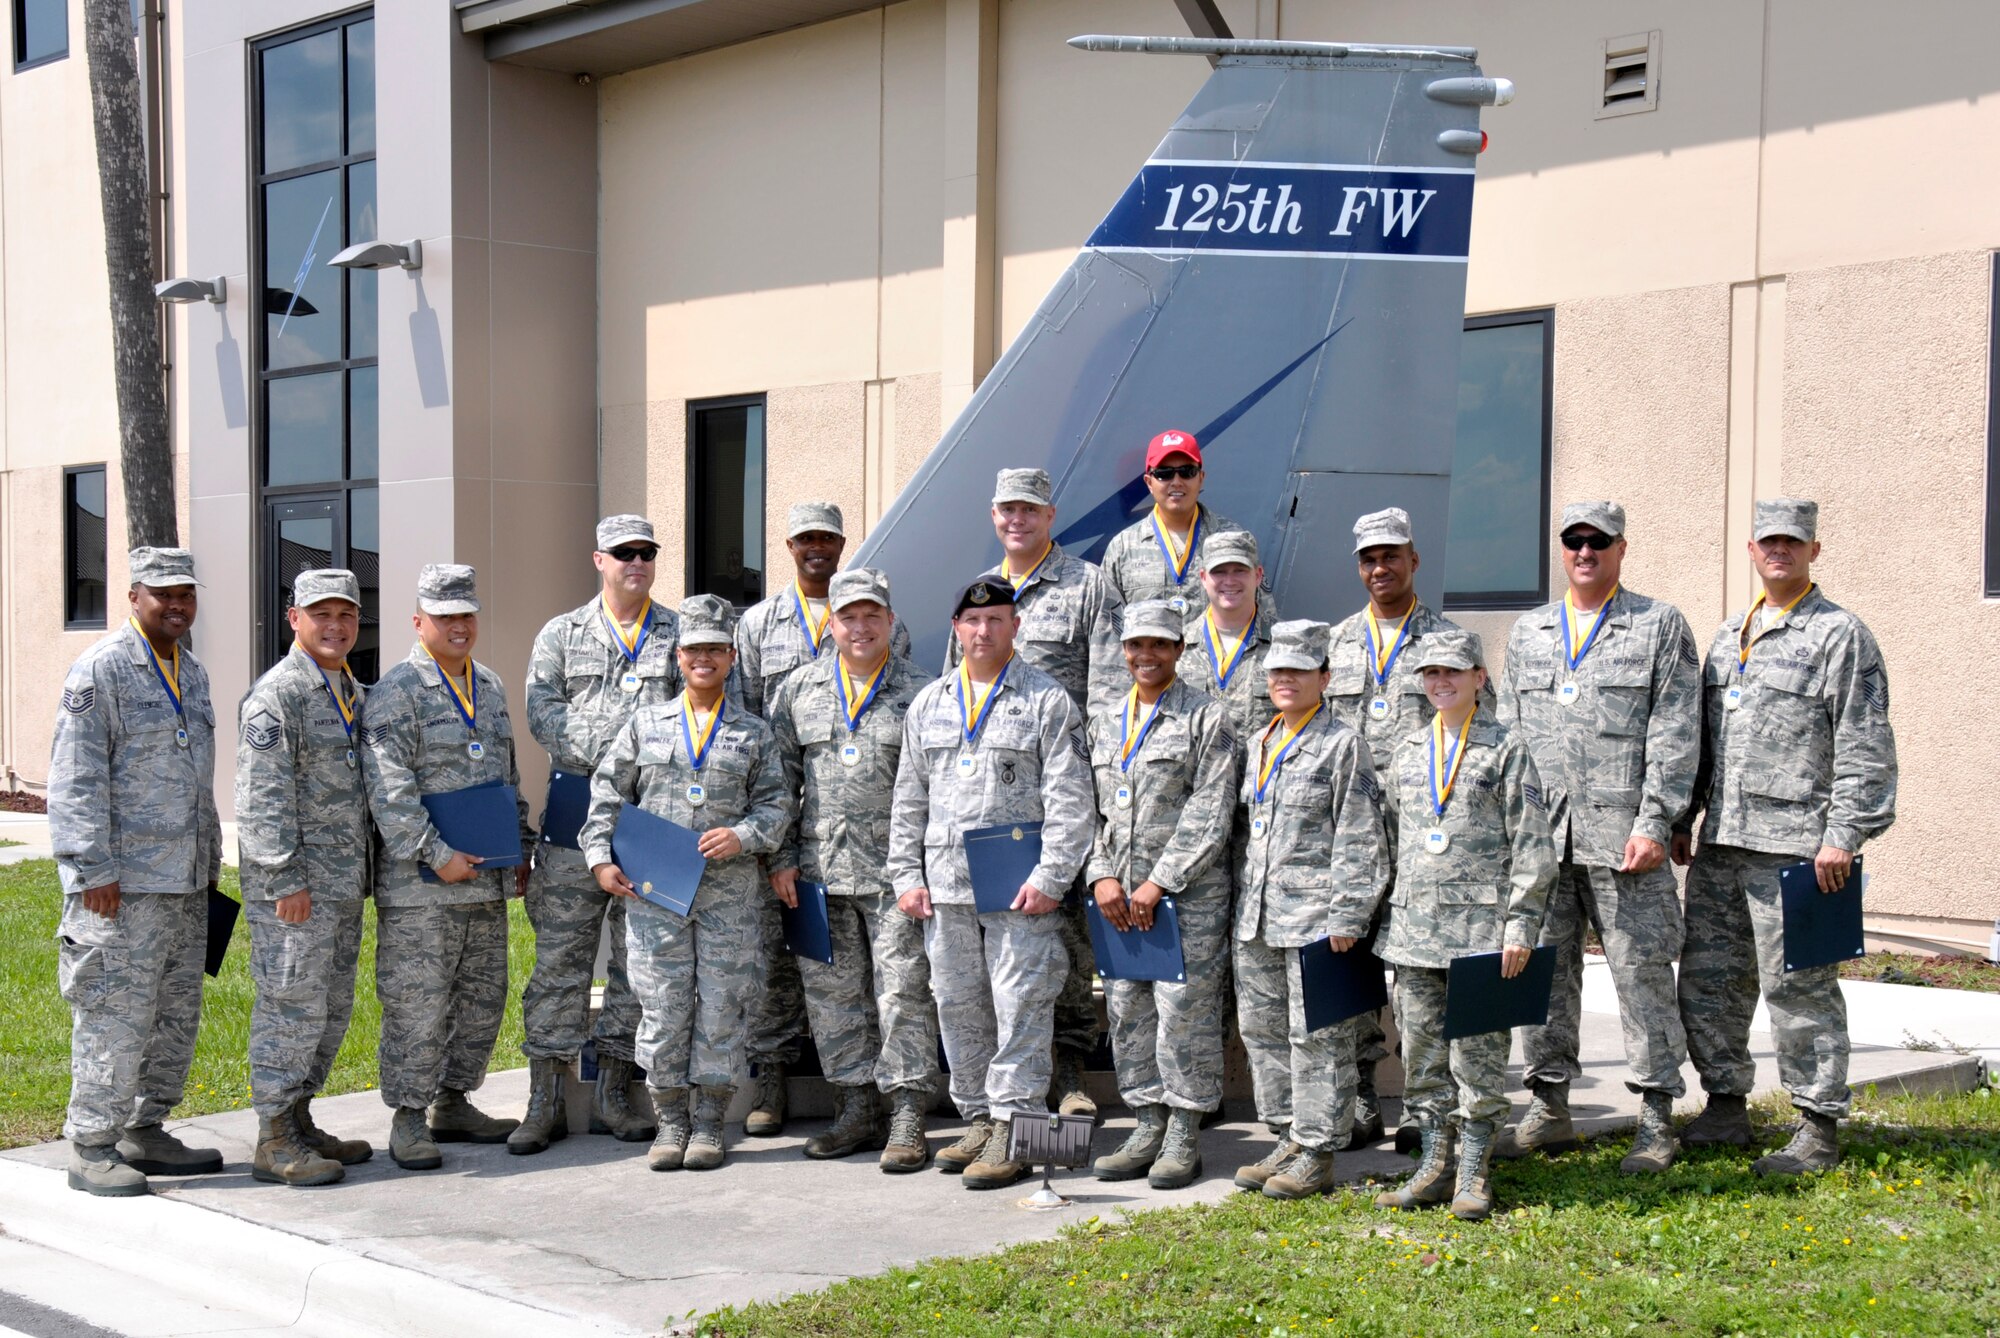 CCAF Graduates pose for a group photo after the CCAF graduation held at the 125th Fighter Wing, Jacksonville Fla. on August 16, 2014. (U.S. Air Force photo by AB Nitza Muniz)